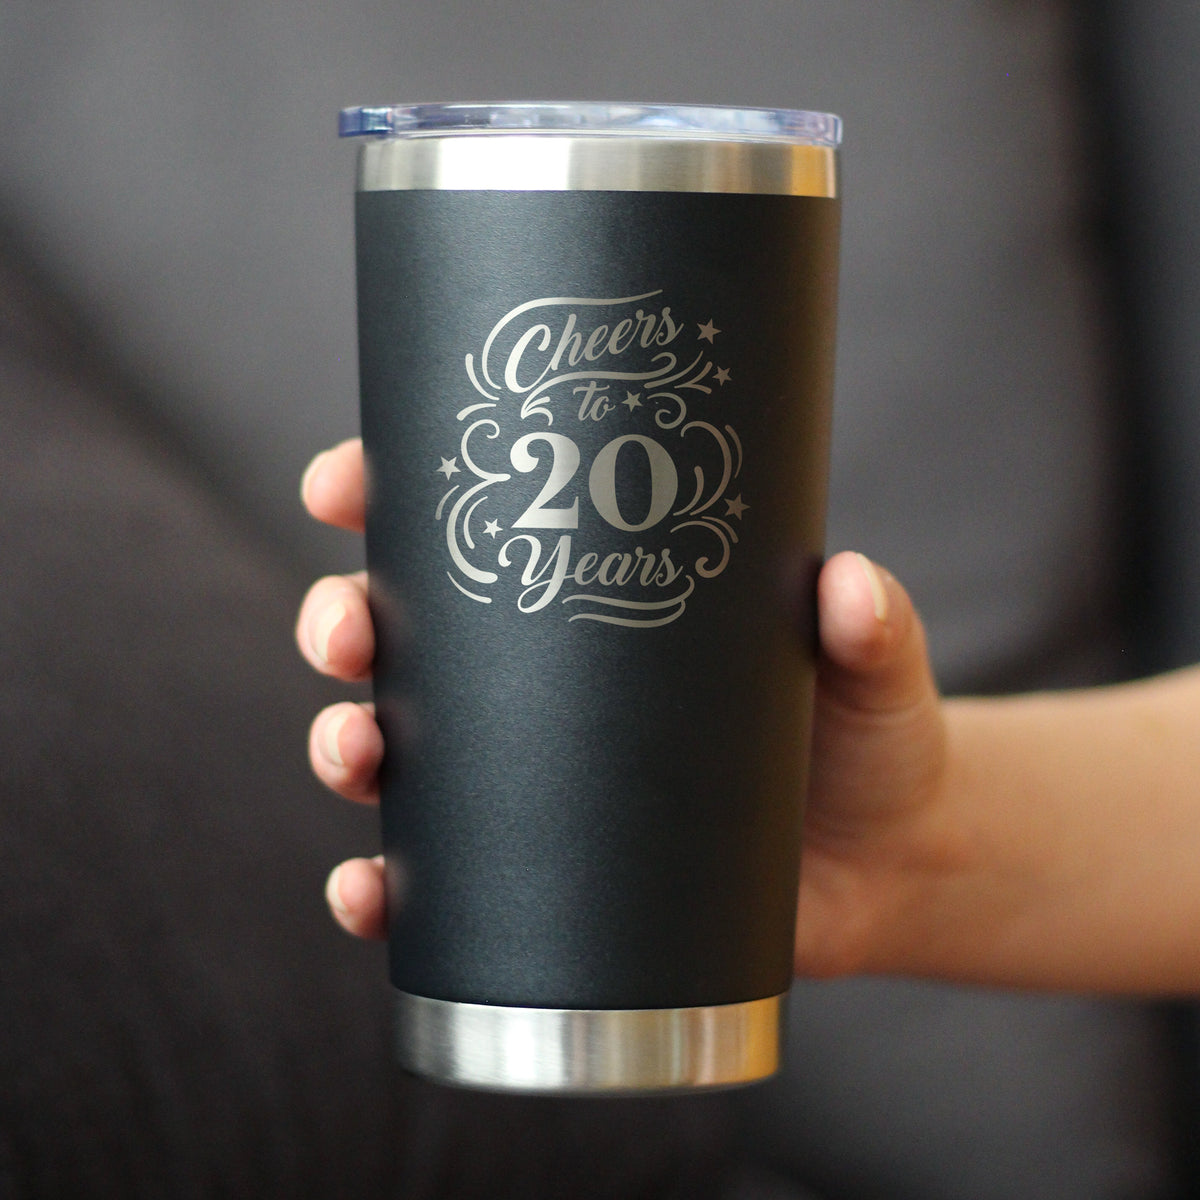 Cheers to 20 Years - Insulated Coffee Tumbler Cup with Sliding Lid - Stainless Steel Insulated Mug - 20th Anniversary Gifts and Party Decor